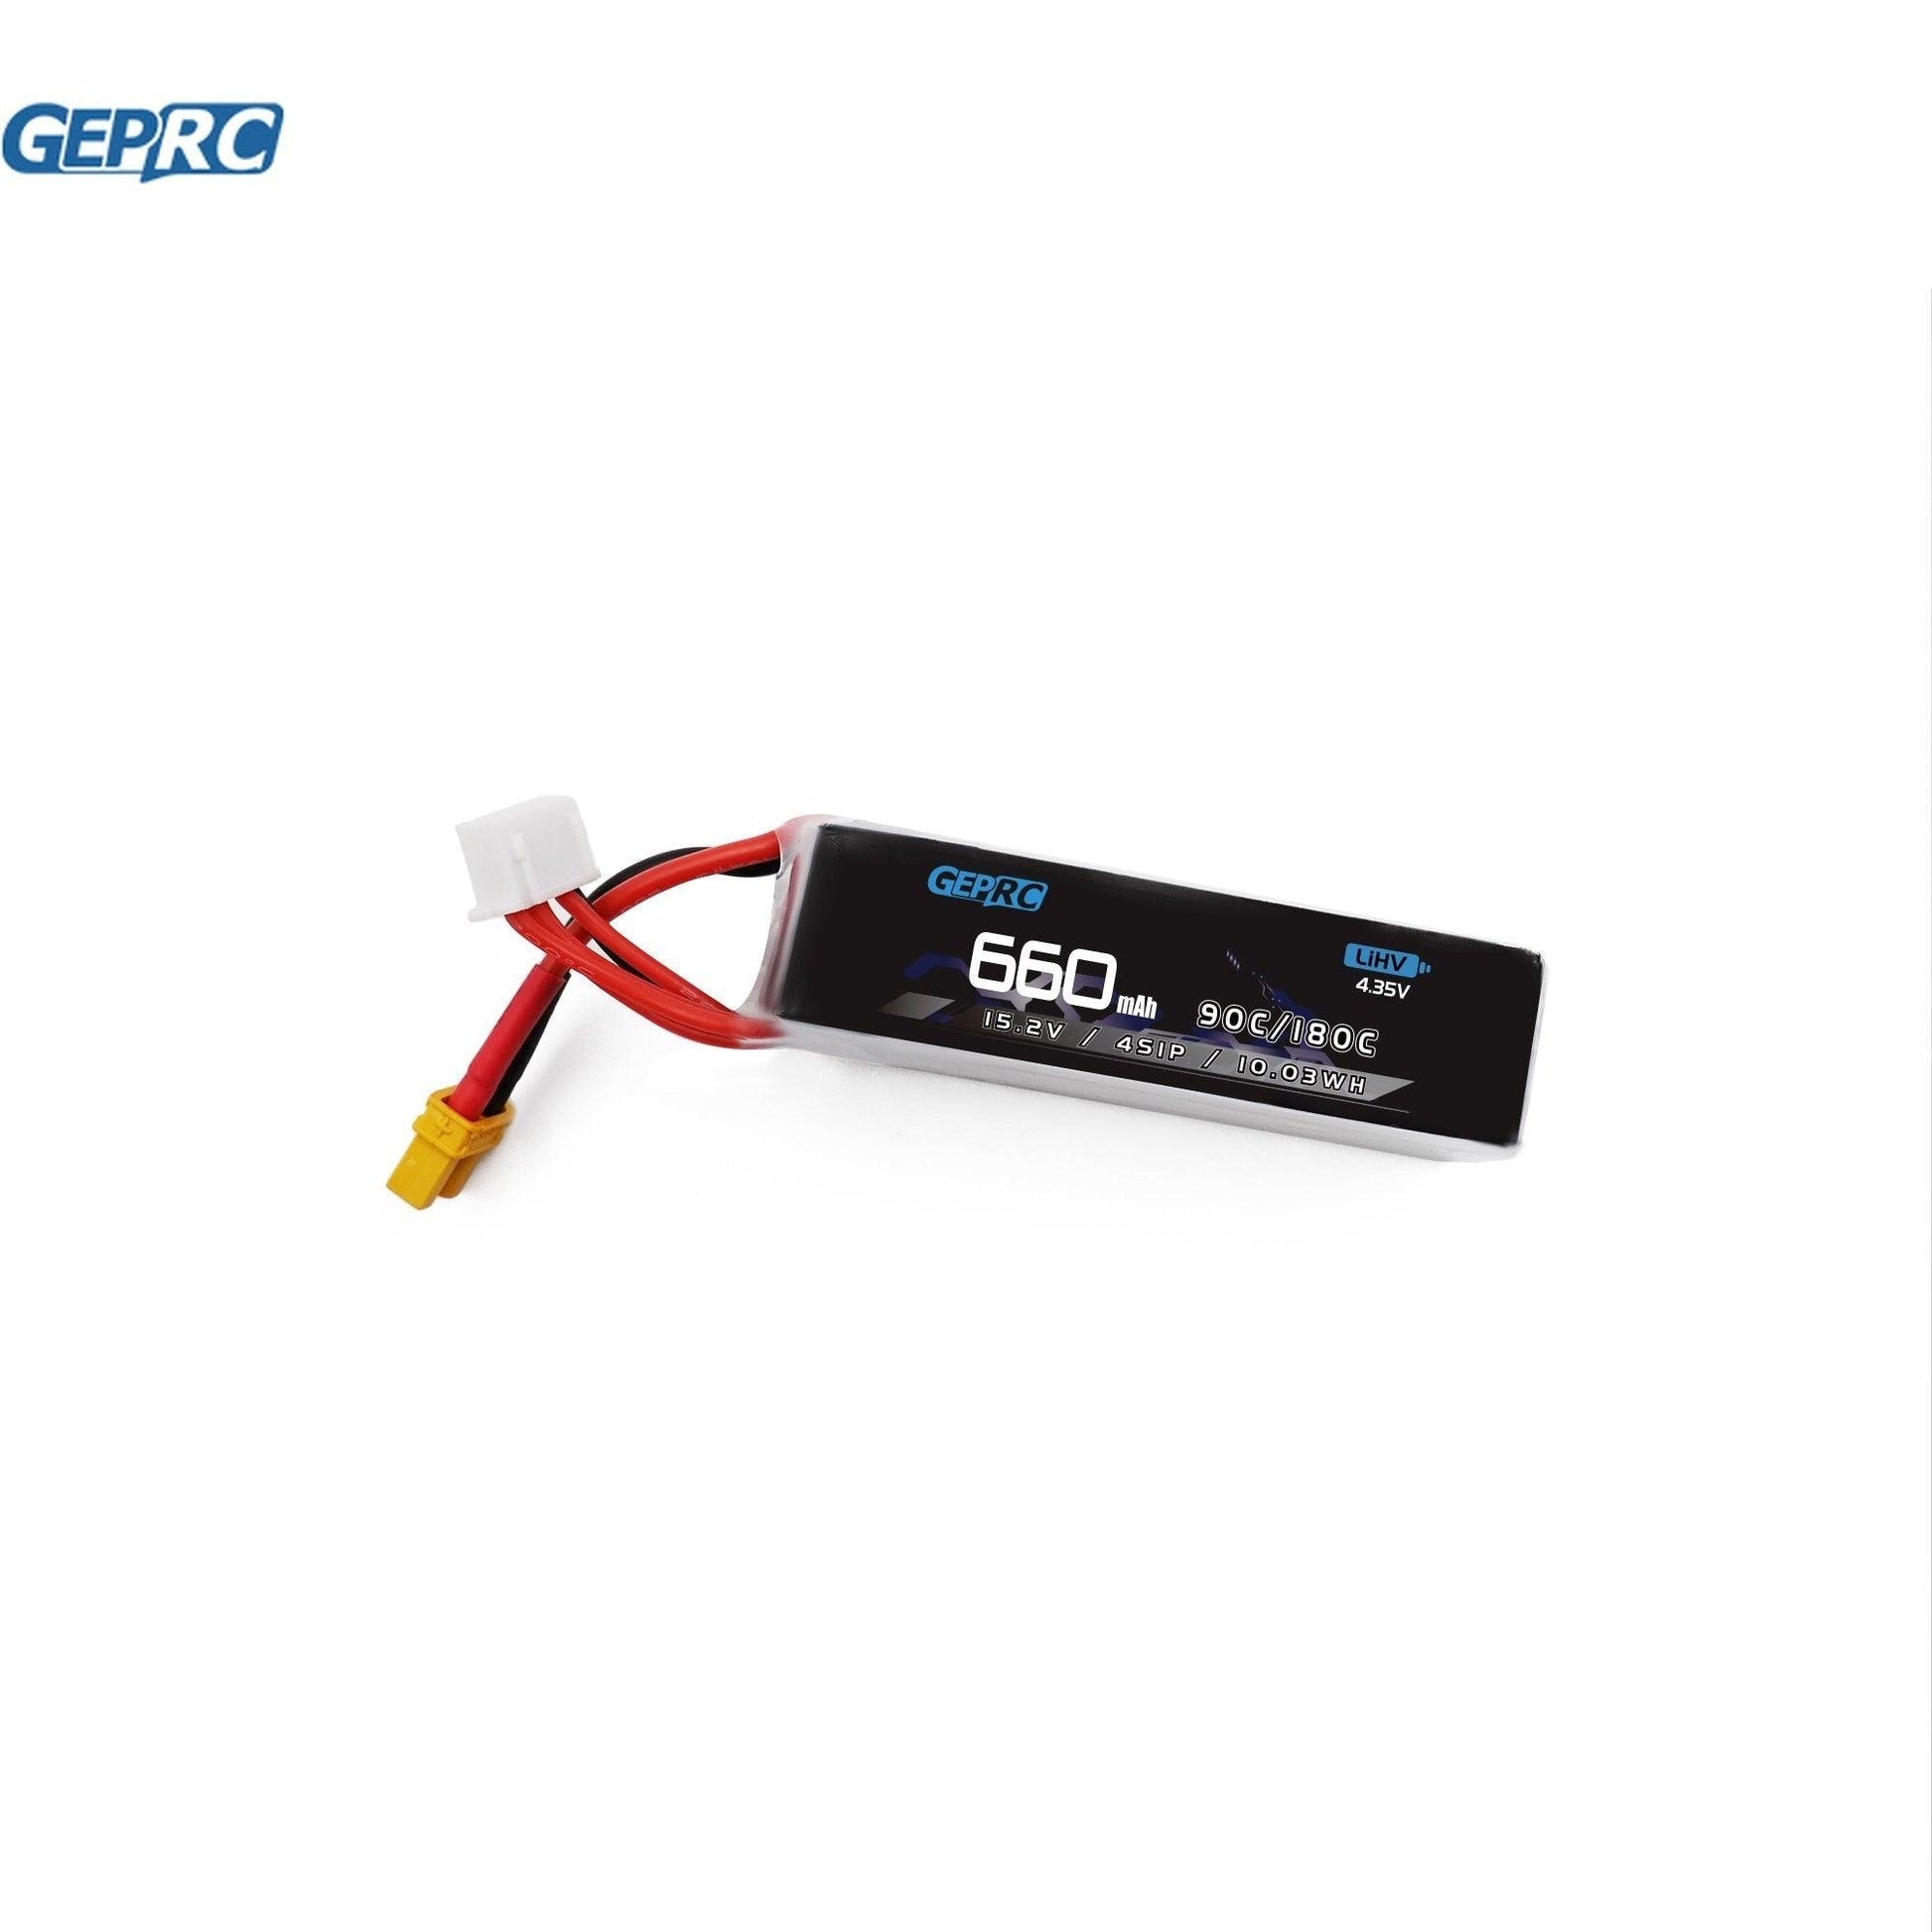 GEPRC 4S 660mAh LiPo Battery - 90/180C HV 3.8V/4.35V Suitable For Cinelog Series For RC FPV Quadcopter Drone Accessories FPV Drone Battery - RCDrone